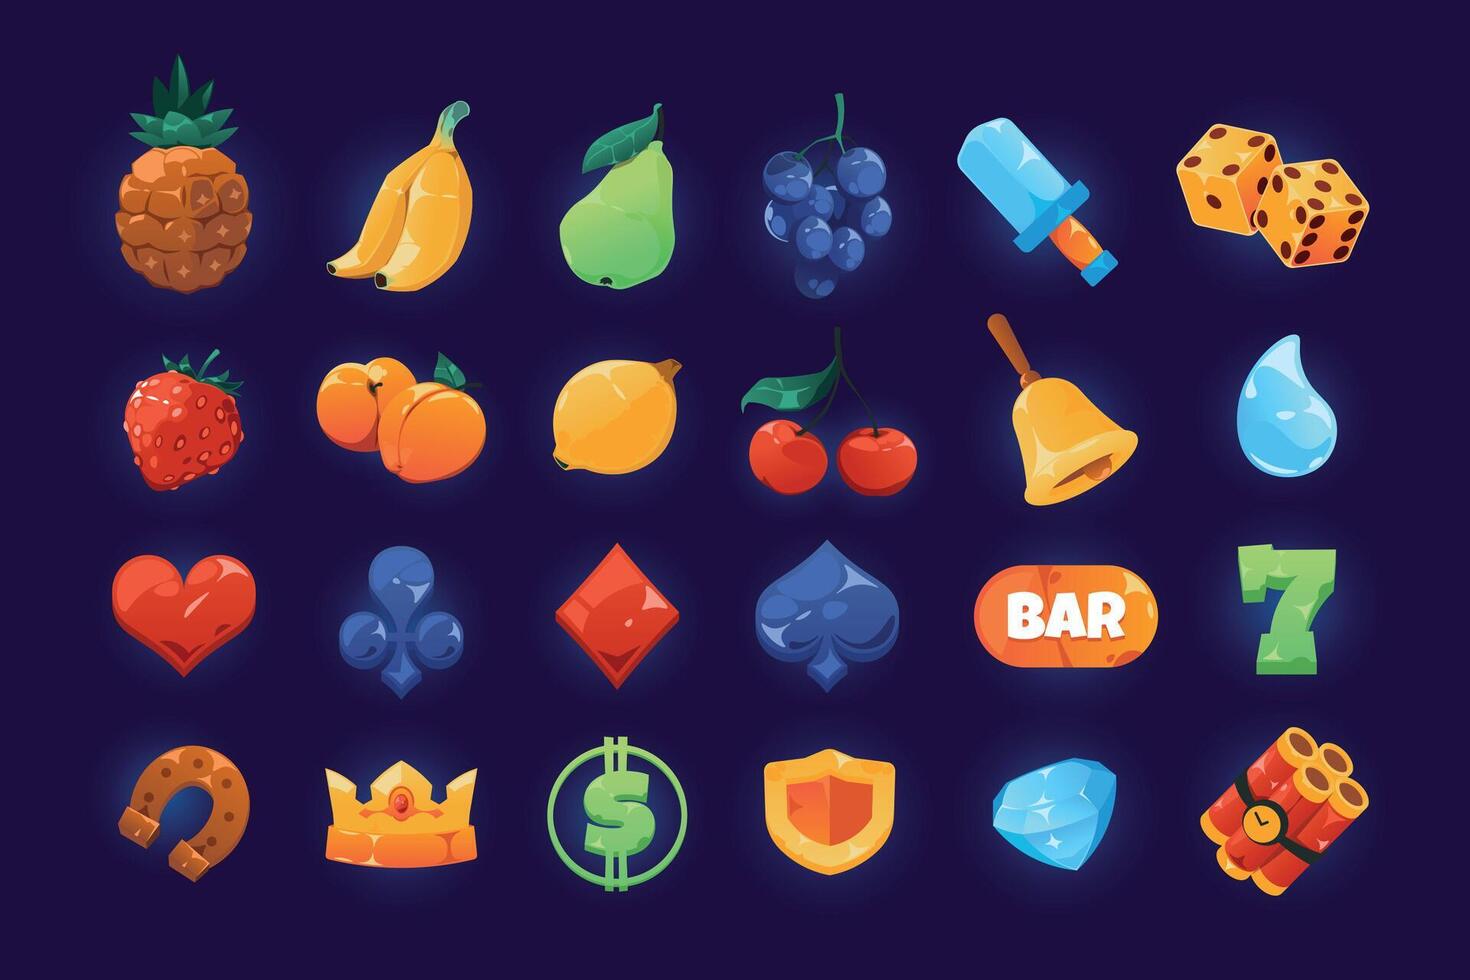 Slot icons. Cartoon shining casino symbols for slot machine and gambling, heart cherry bell crown fruits diamond bar and dollar colorful symbols. Vector isolated set